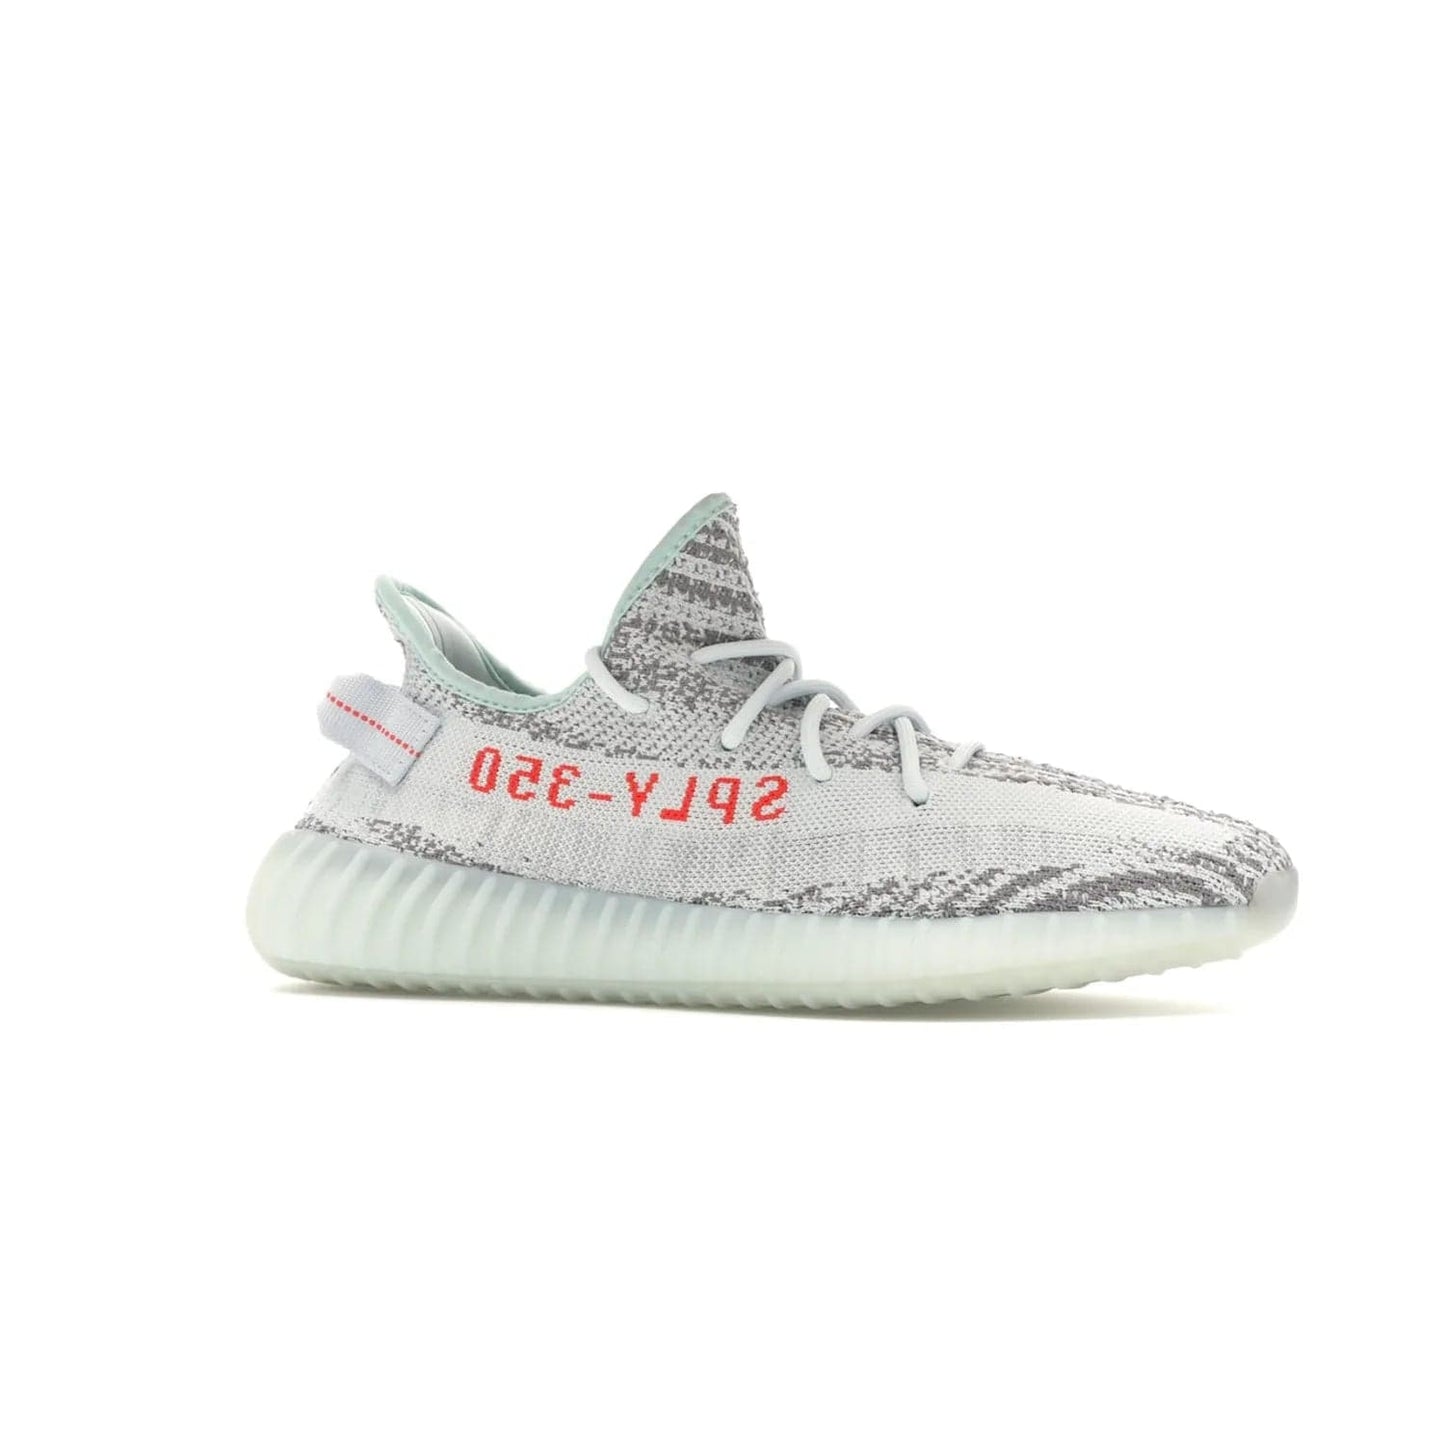 adidas Yeezy Boost 350 V2 Blue Tint - Image 3 - Only at www.BallersClubKickz.com - The adidas Yeezy Boost 350 V2 Blue Tint merges fashion and functionality with its Primeknit upper and Boost sole. Released in December 2017, this luxurious sneaker is perfect for making a stylish statement.